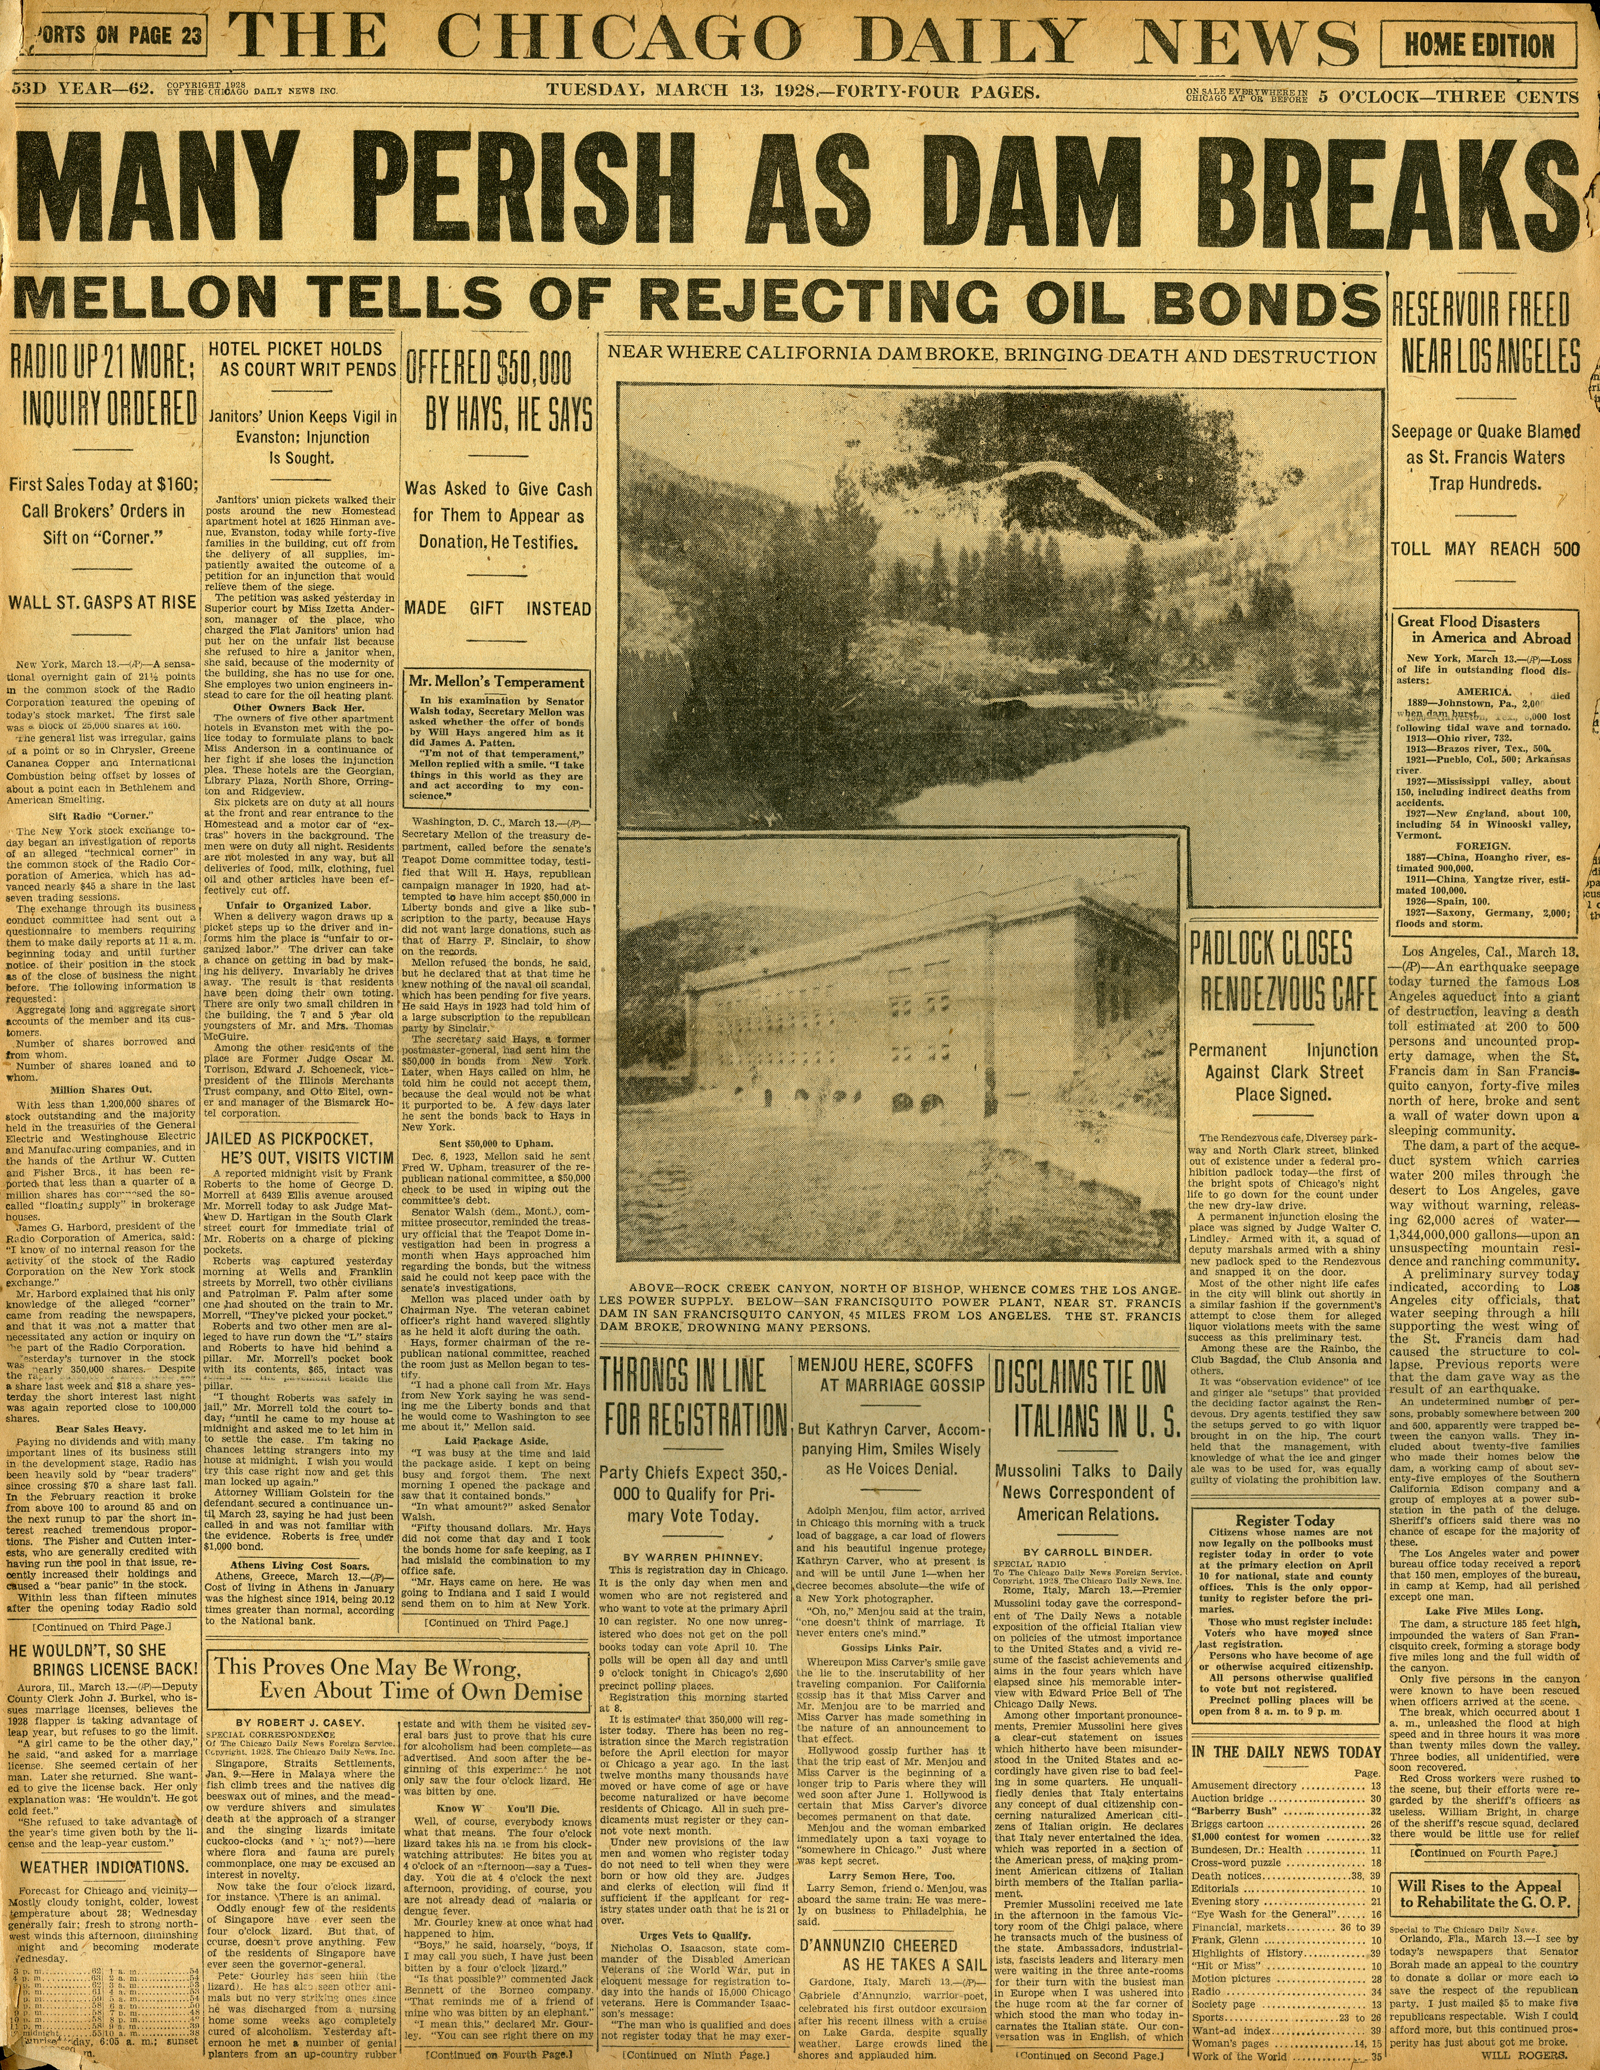 Newspapers of the St. Francis Dam Disaster.

THE CHICAGO DAILY NEWS (NEWSPAPER),

TUESDAY, MARCH 13, 1928